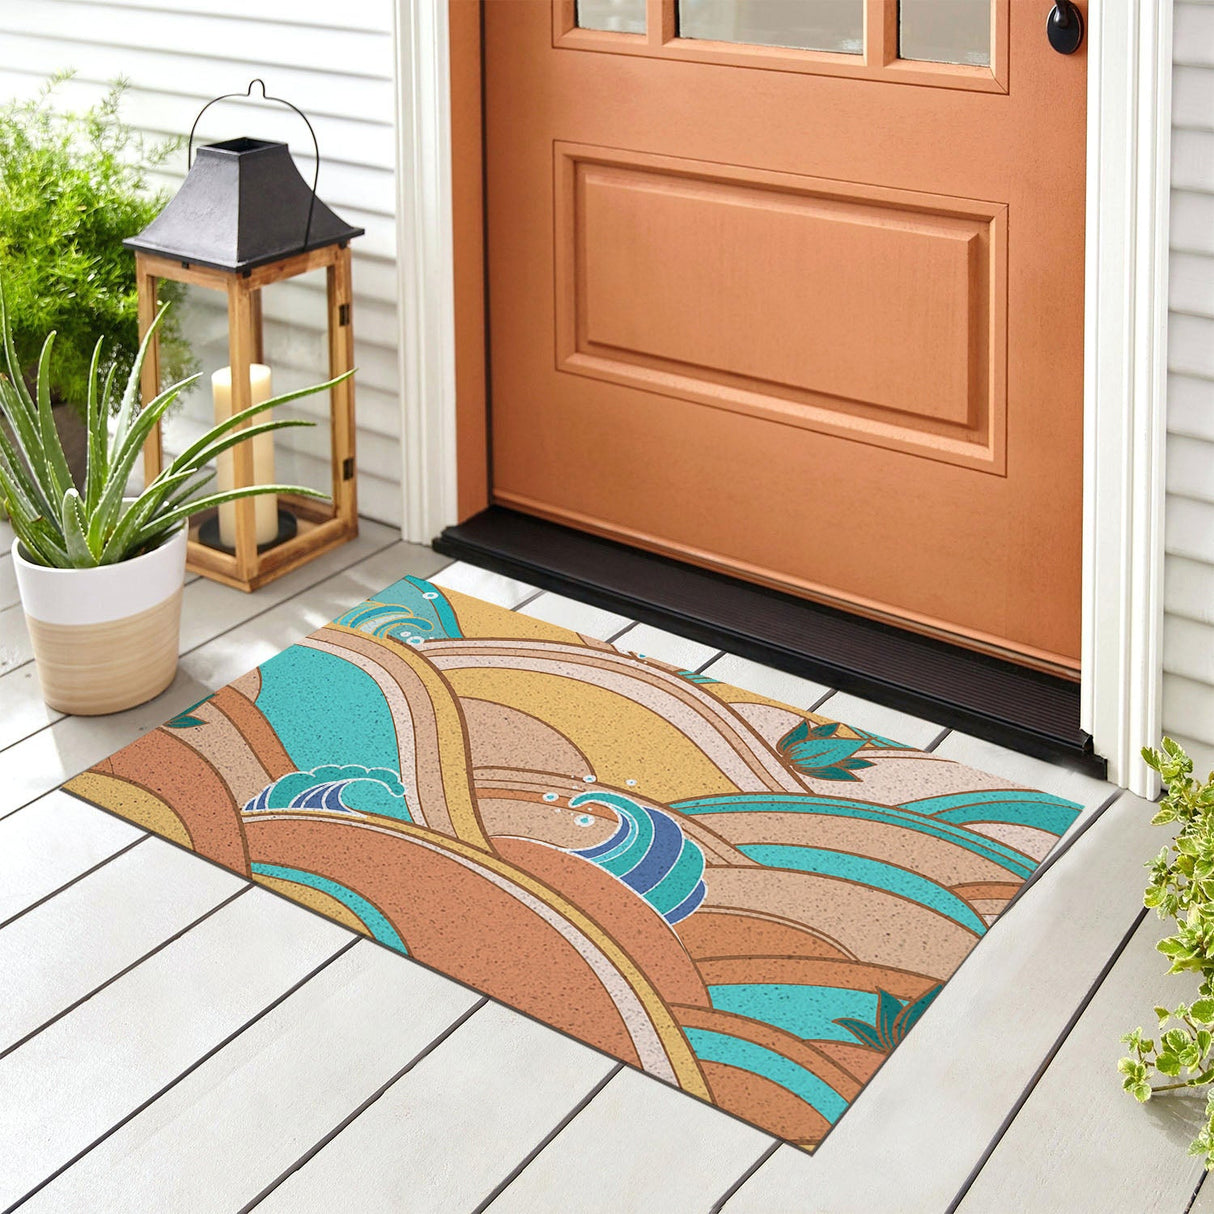 Feblilac Yellow and blue Japanese Waves PVC Coil Door Mat